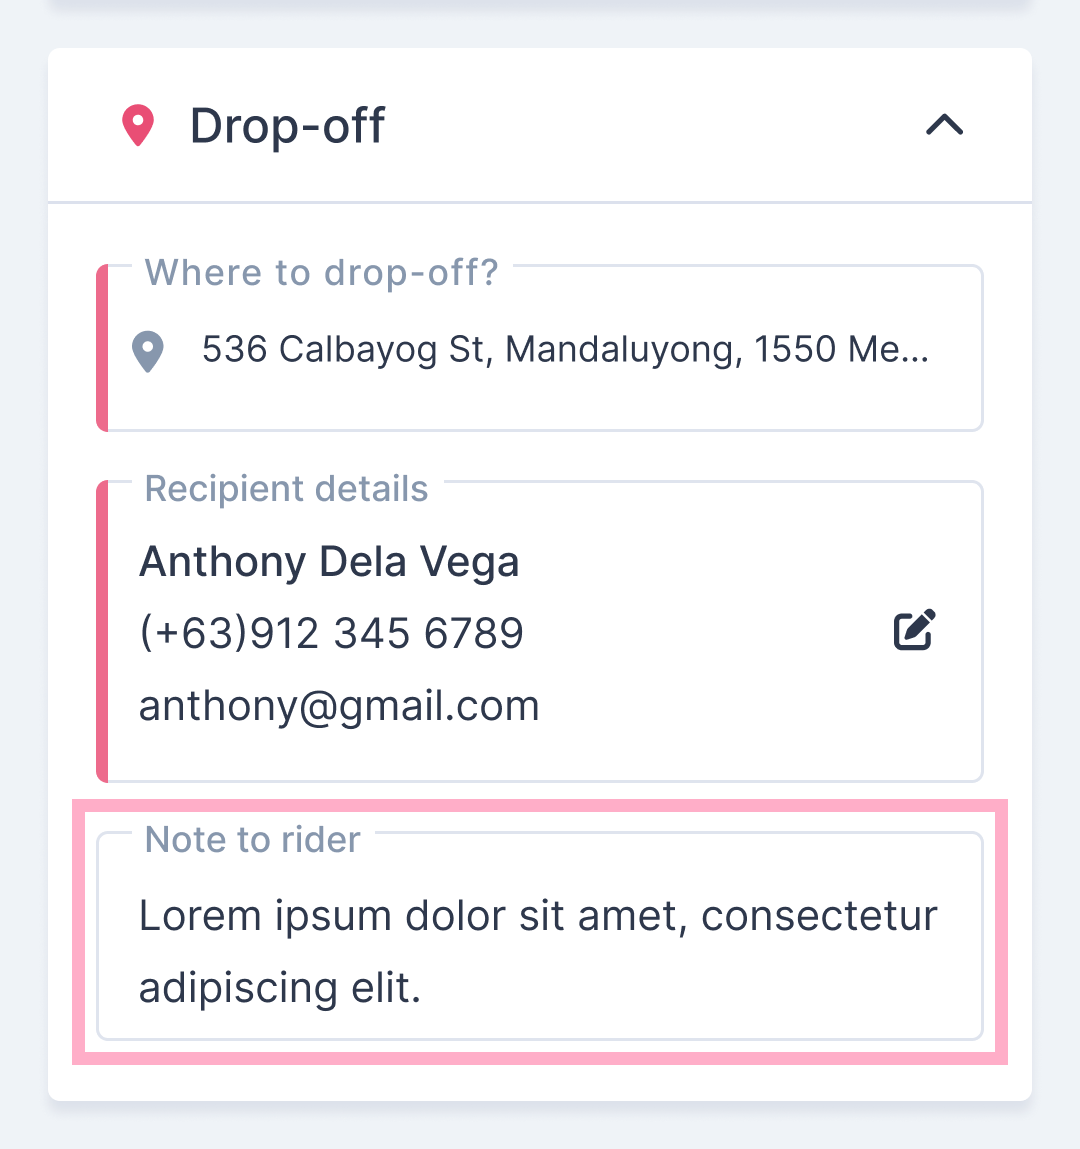 add drop-off details - note